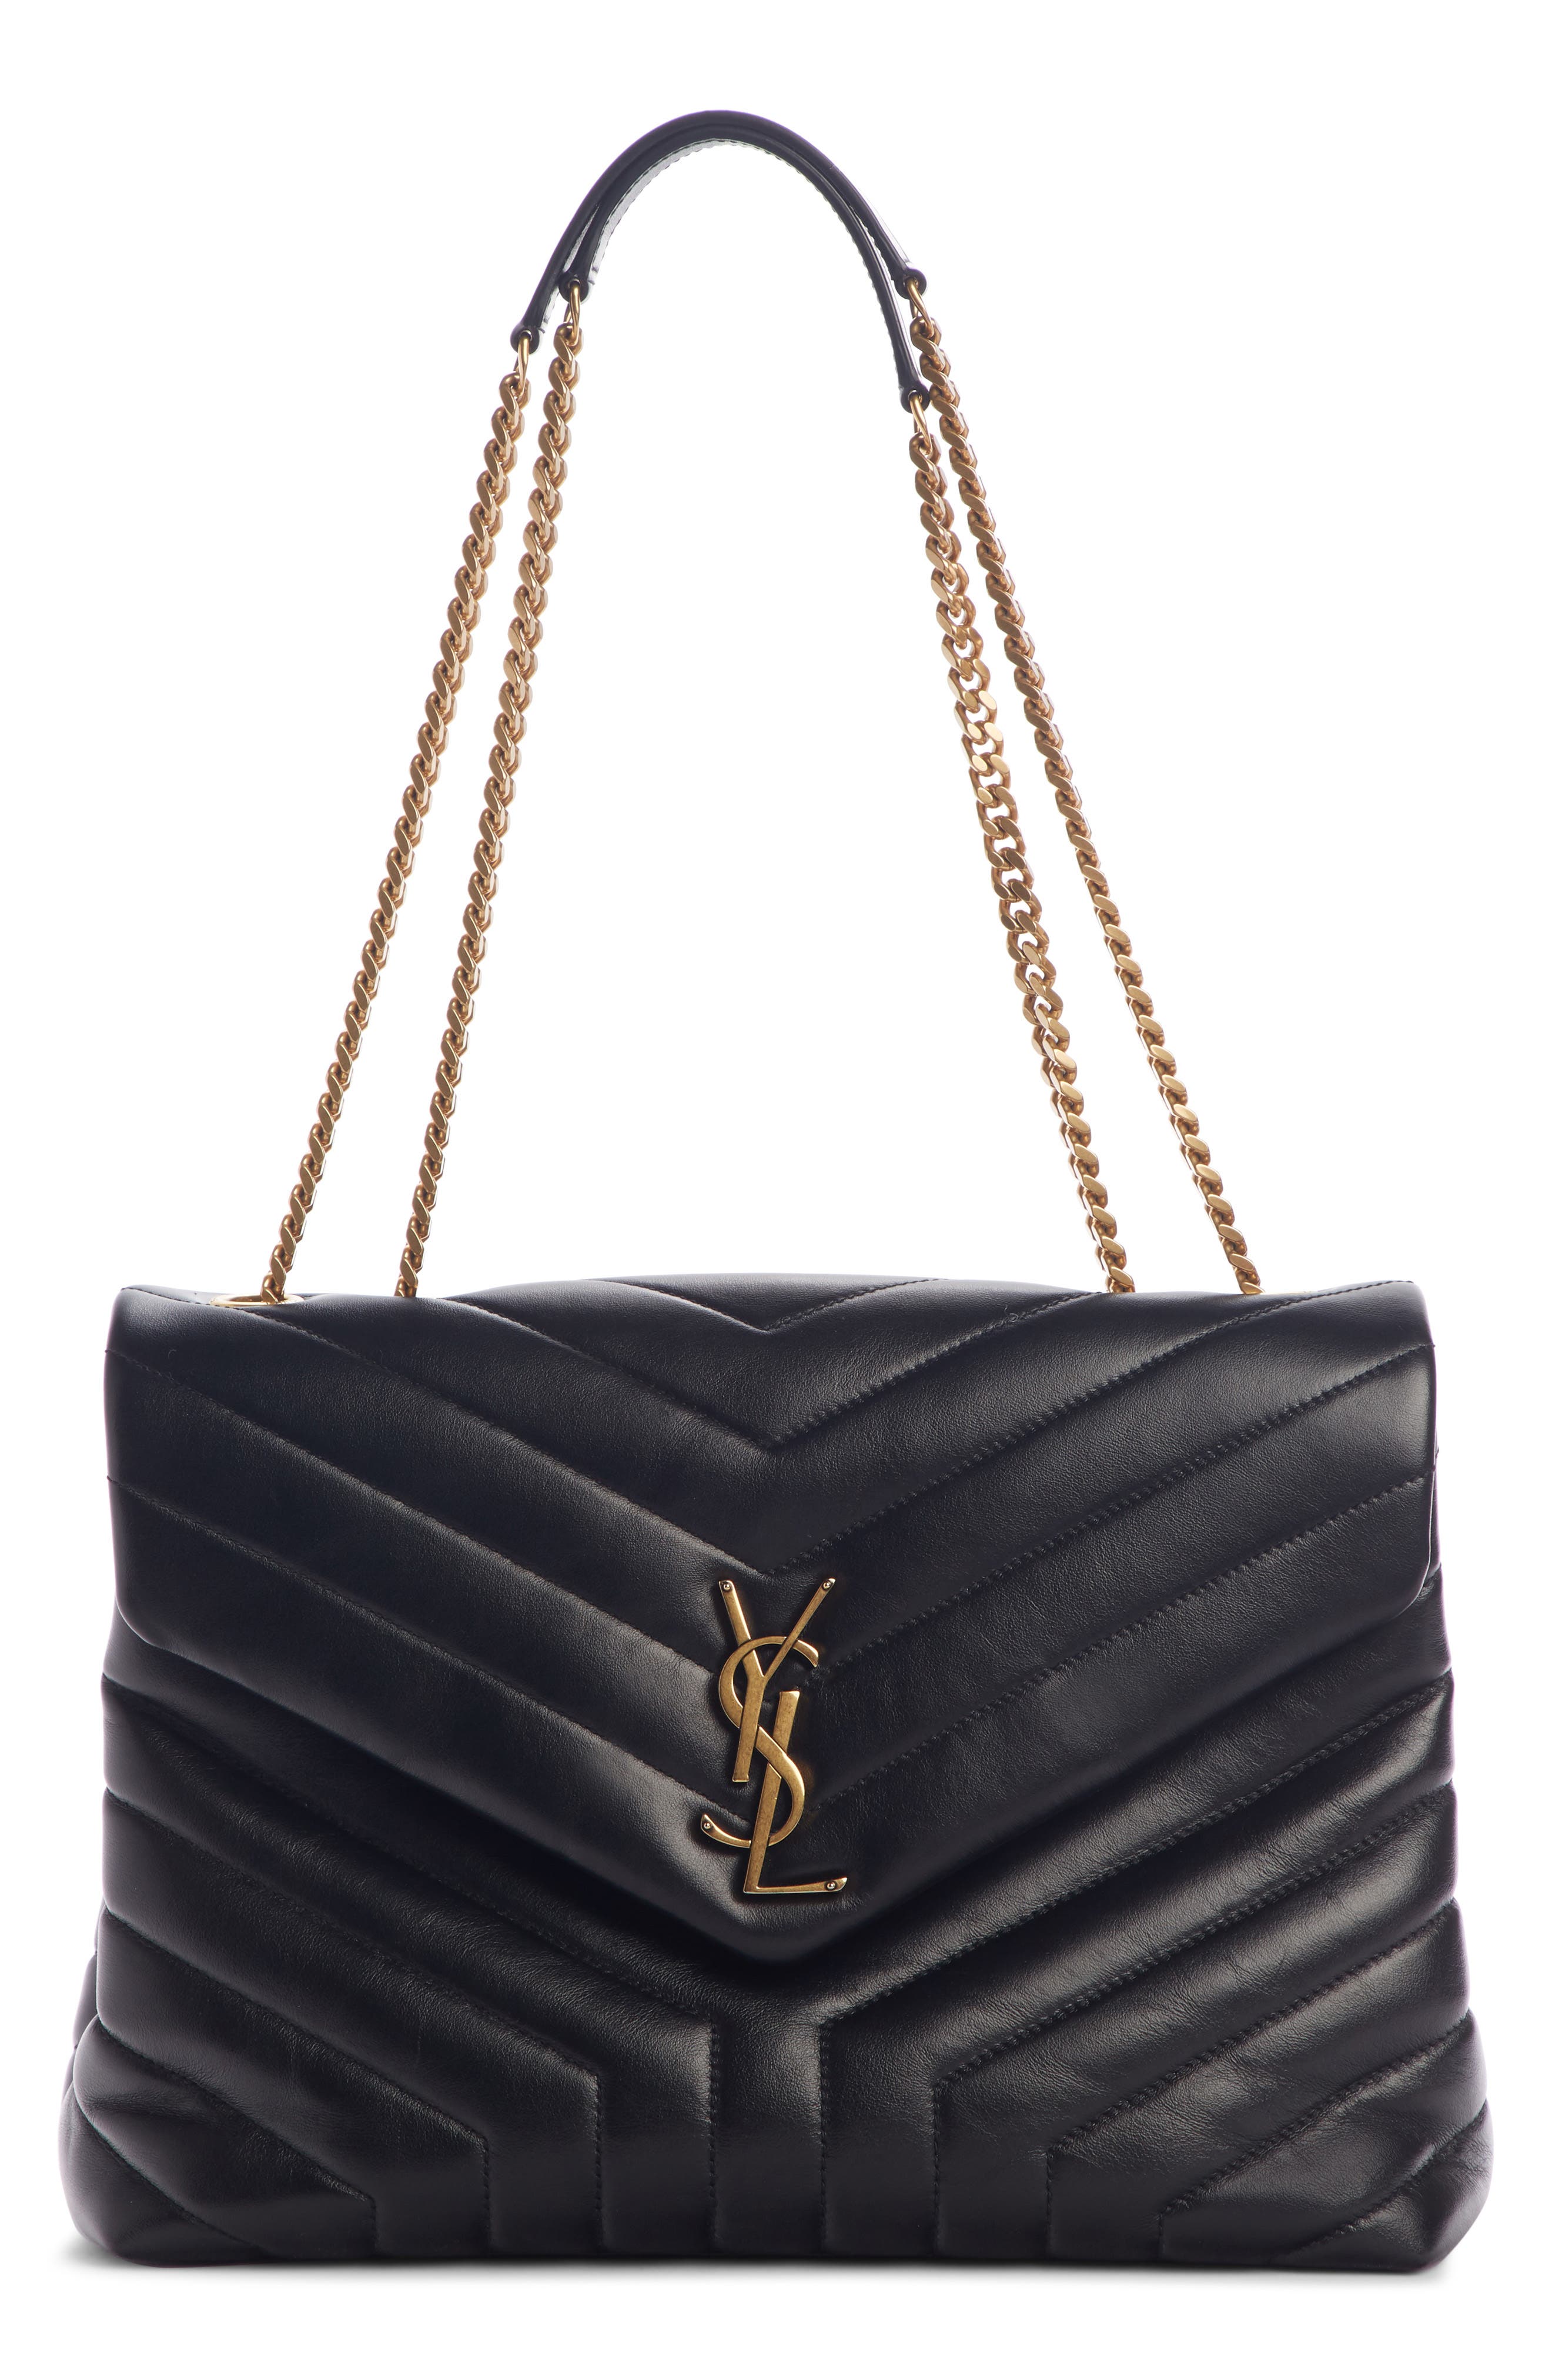 ysl bags and shoes